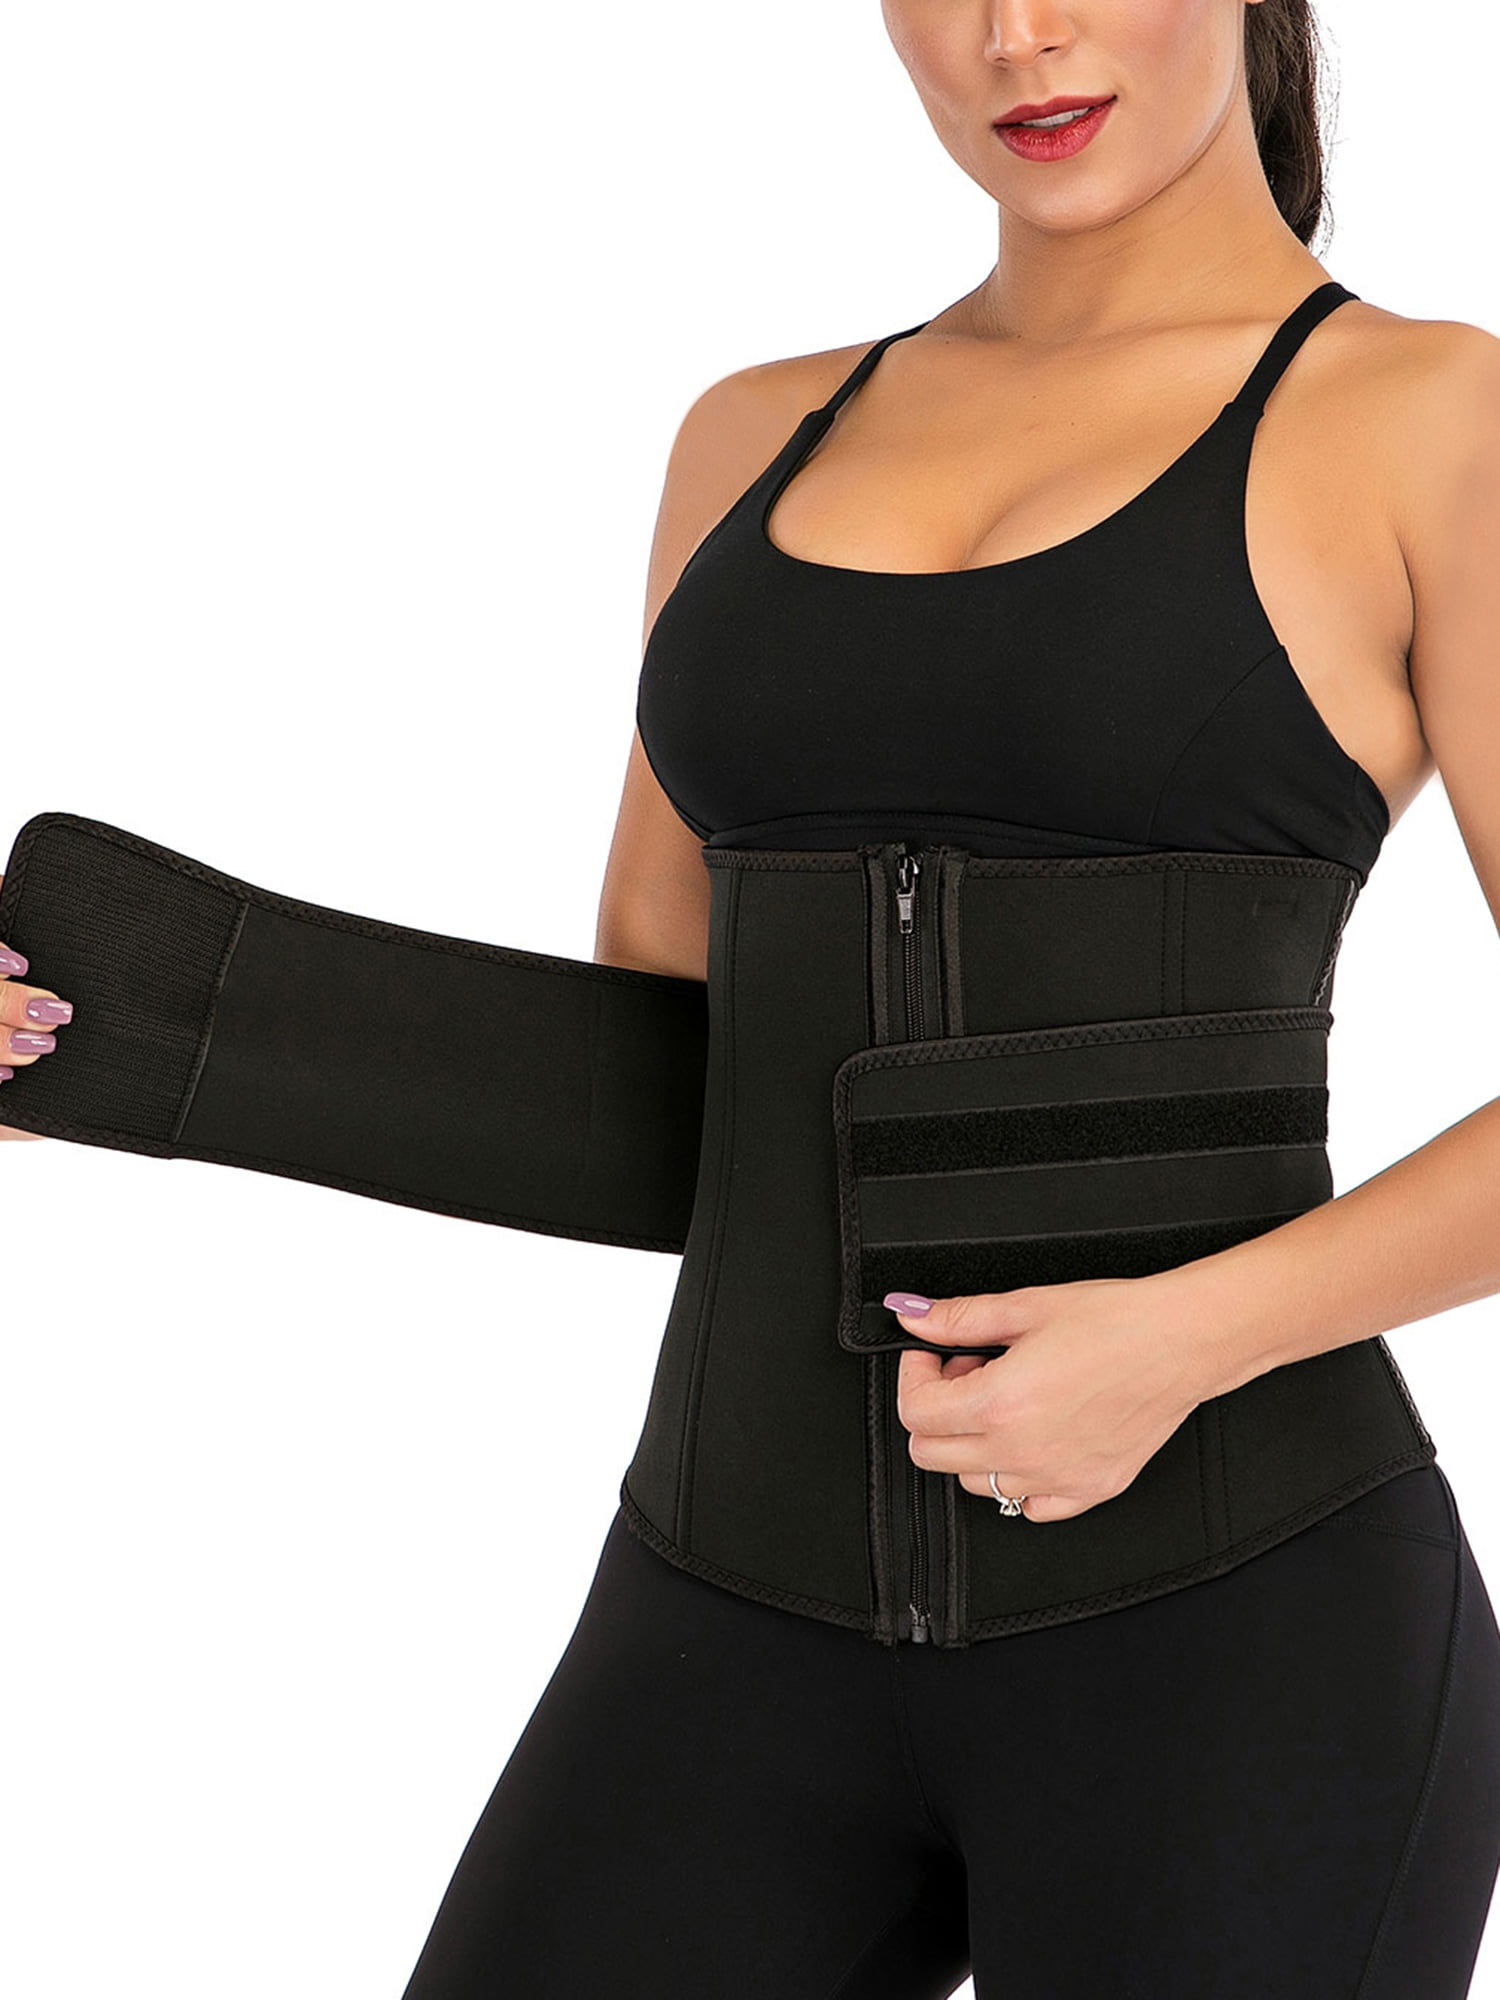 Youloveit Womens Waist Trainer Sports Sweat Shaper Neoprene Vest for Weight Loss